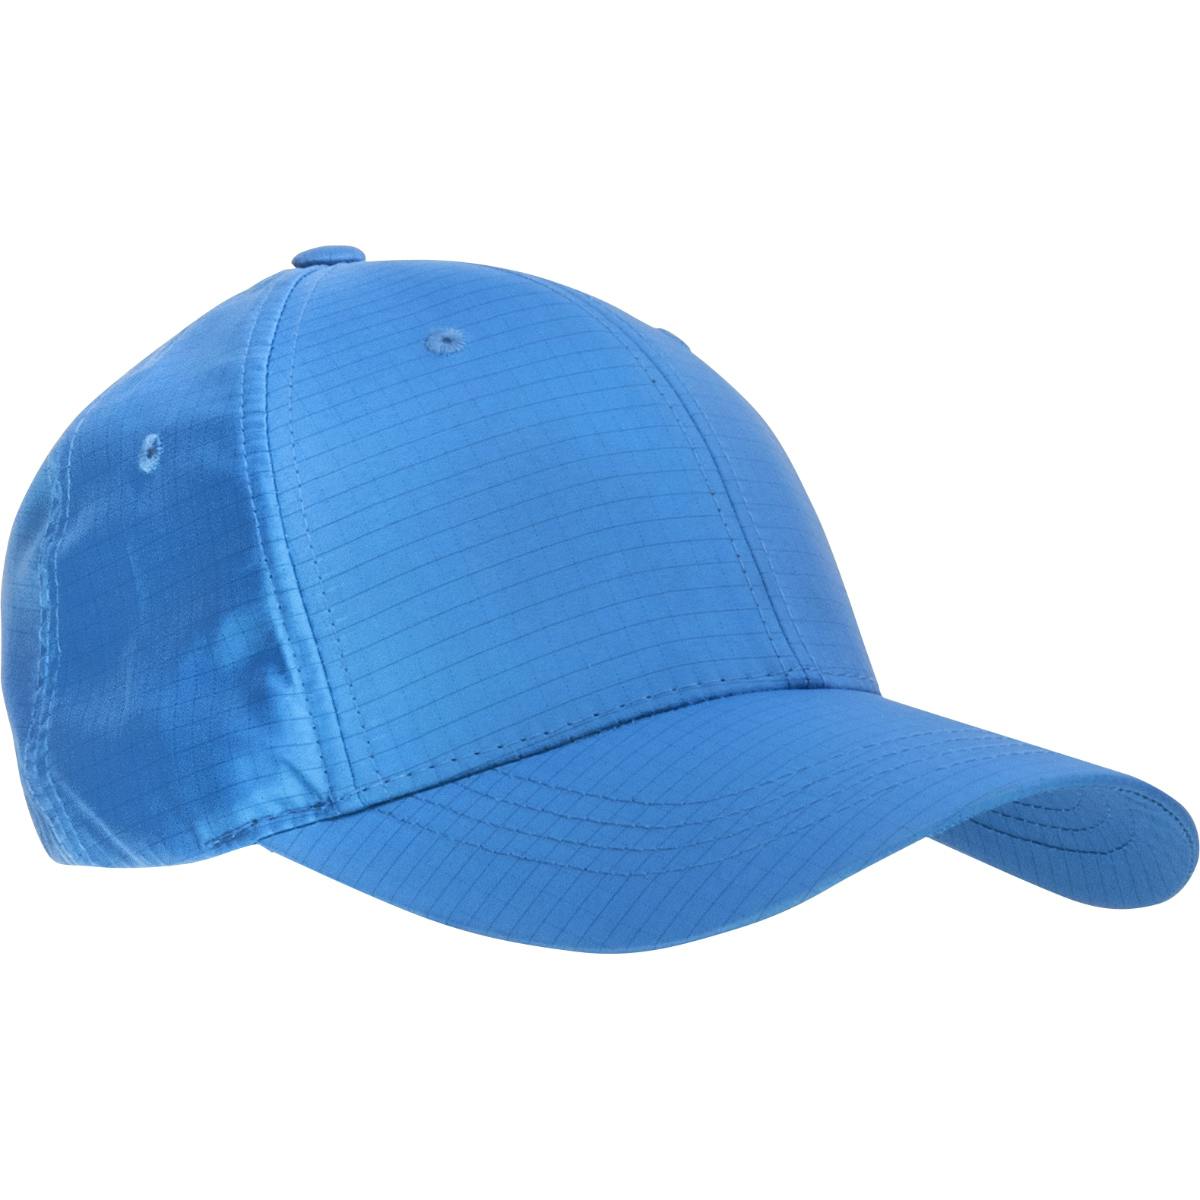 Auto Grid ISO 5 (Class 100) Cleanroom Paint / Powder Coating Baseball Hat, Blue (CAHAT)